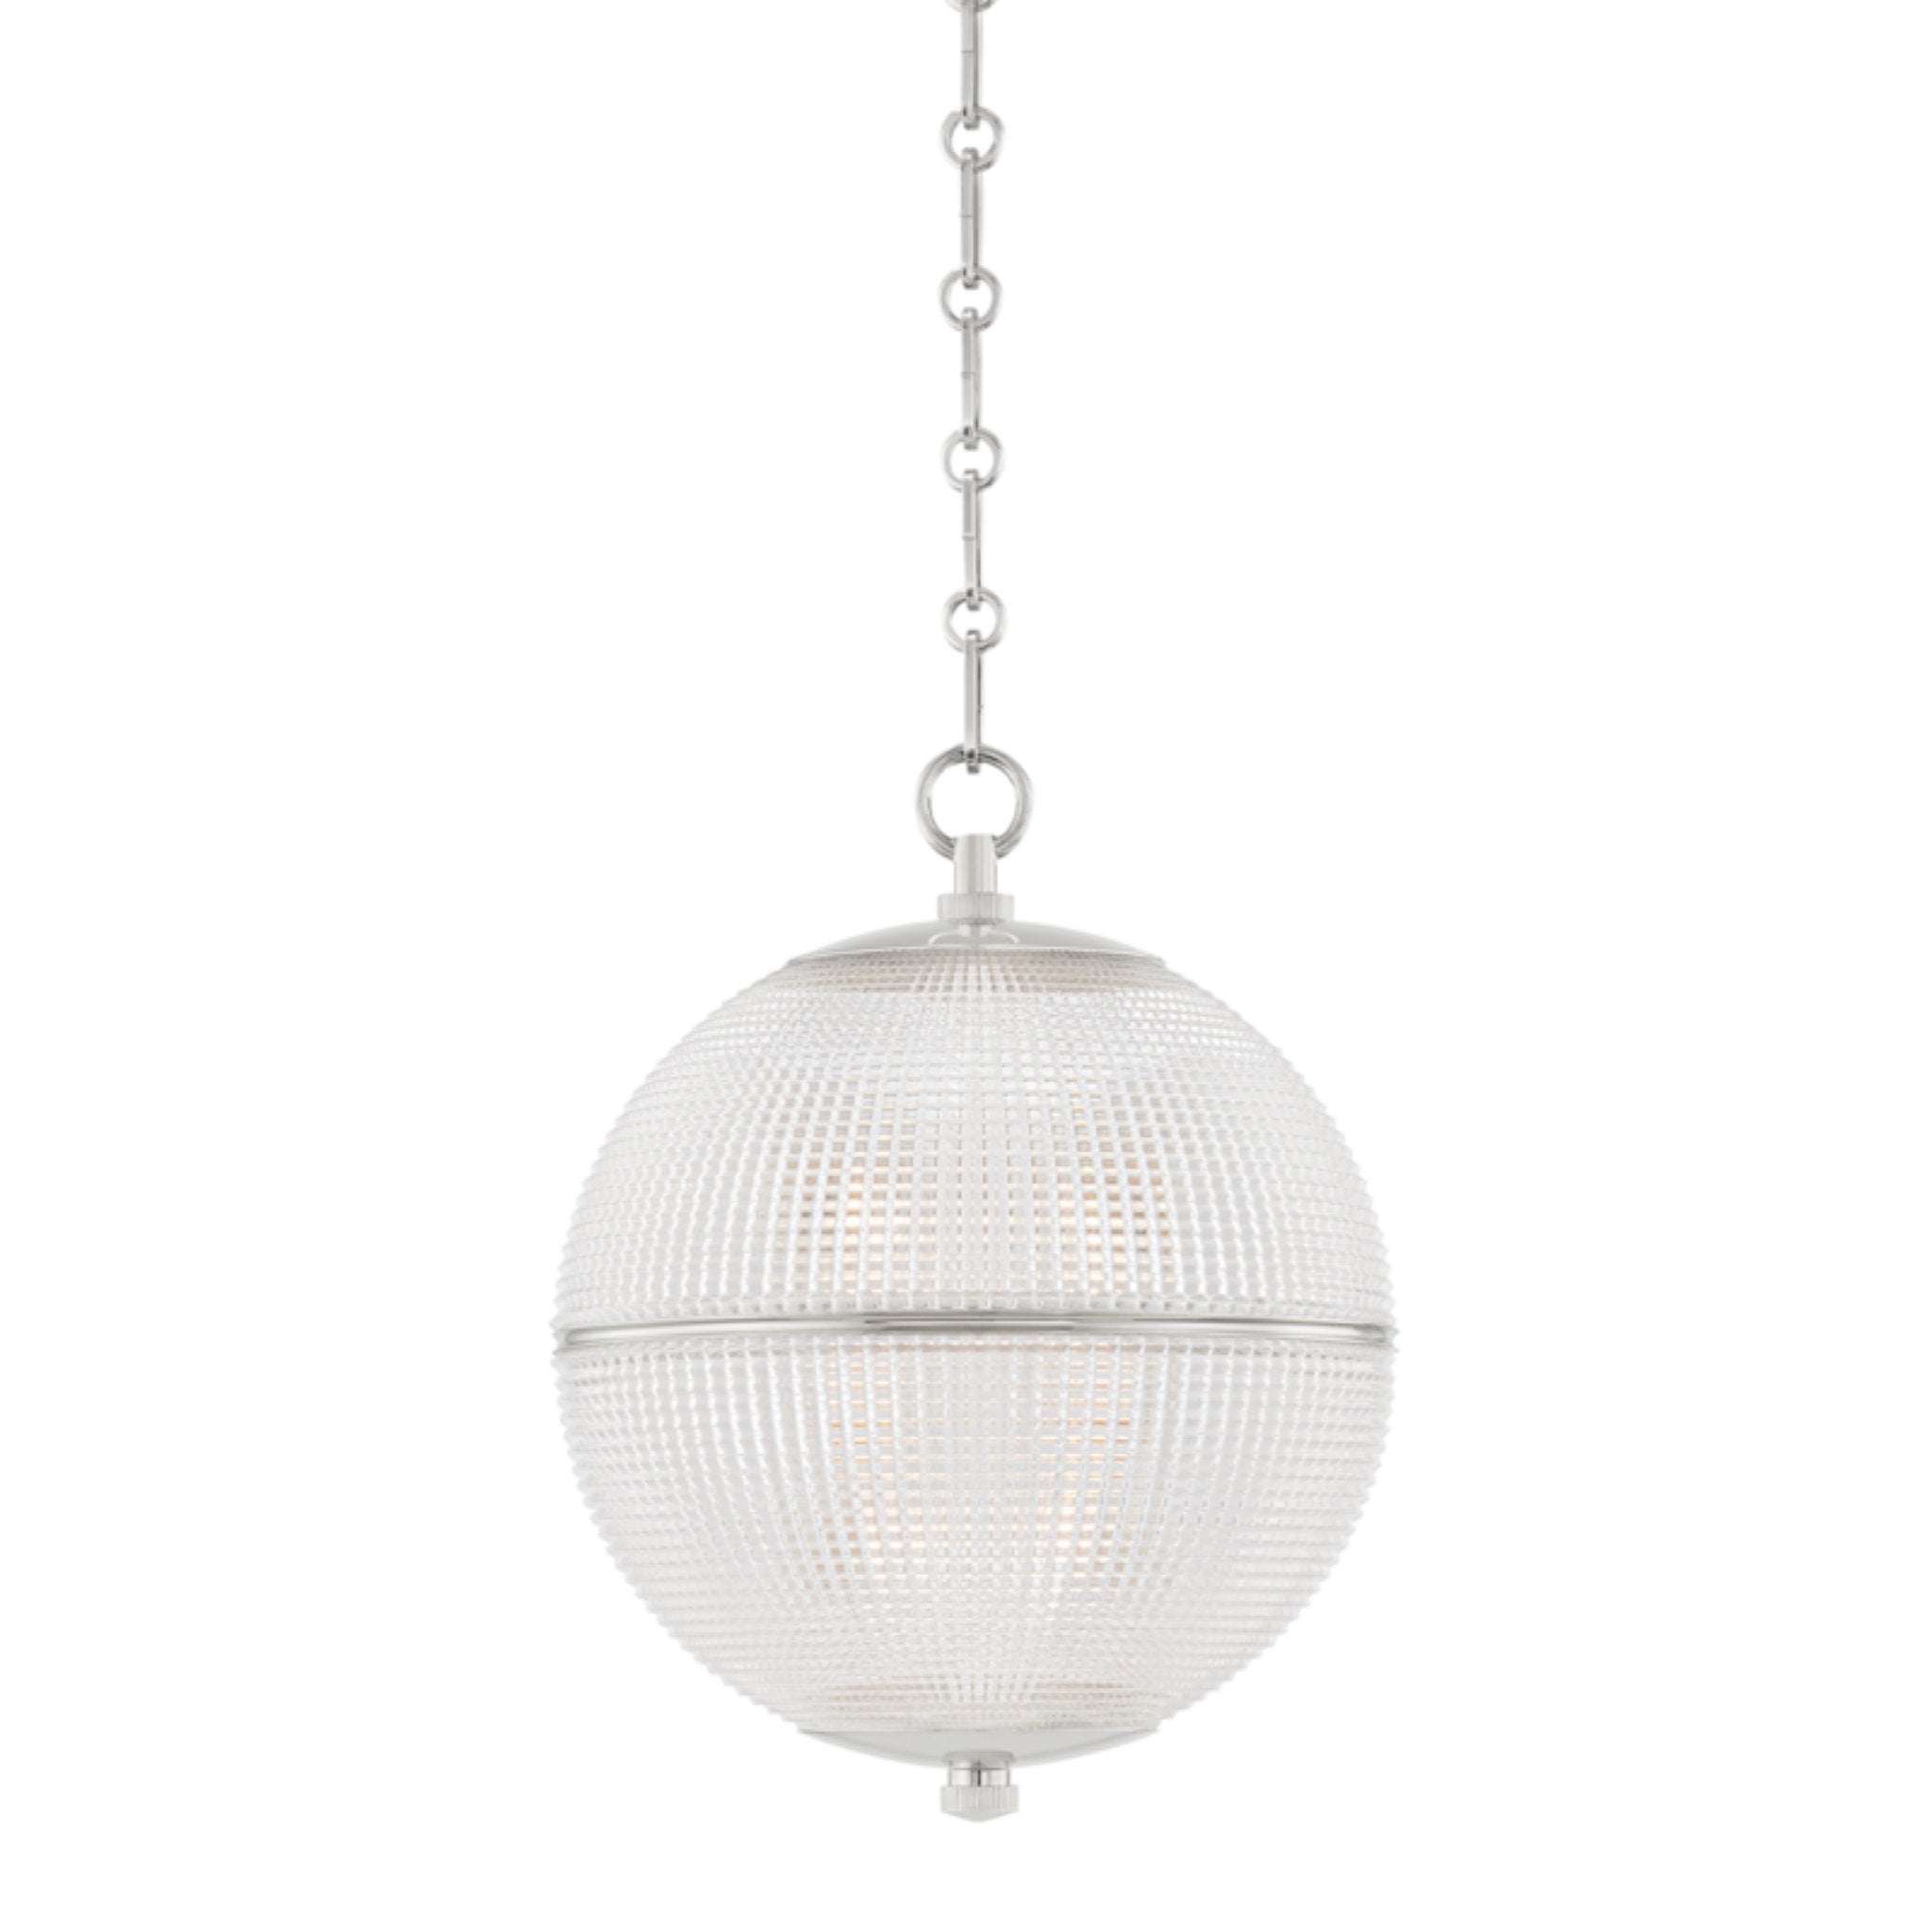 Sphere No. 3 1 Light Pendant in Polished Nickel by Mark D. Sikes